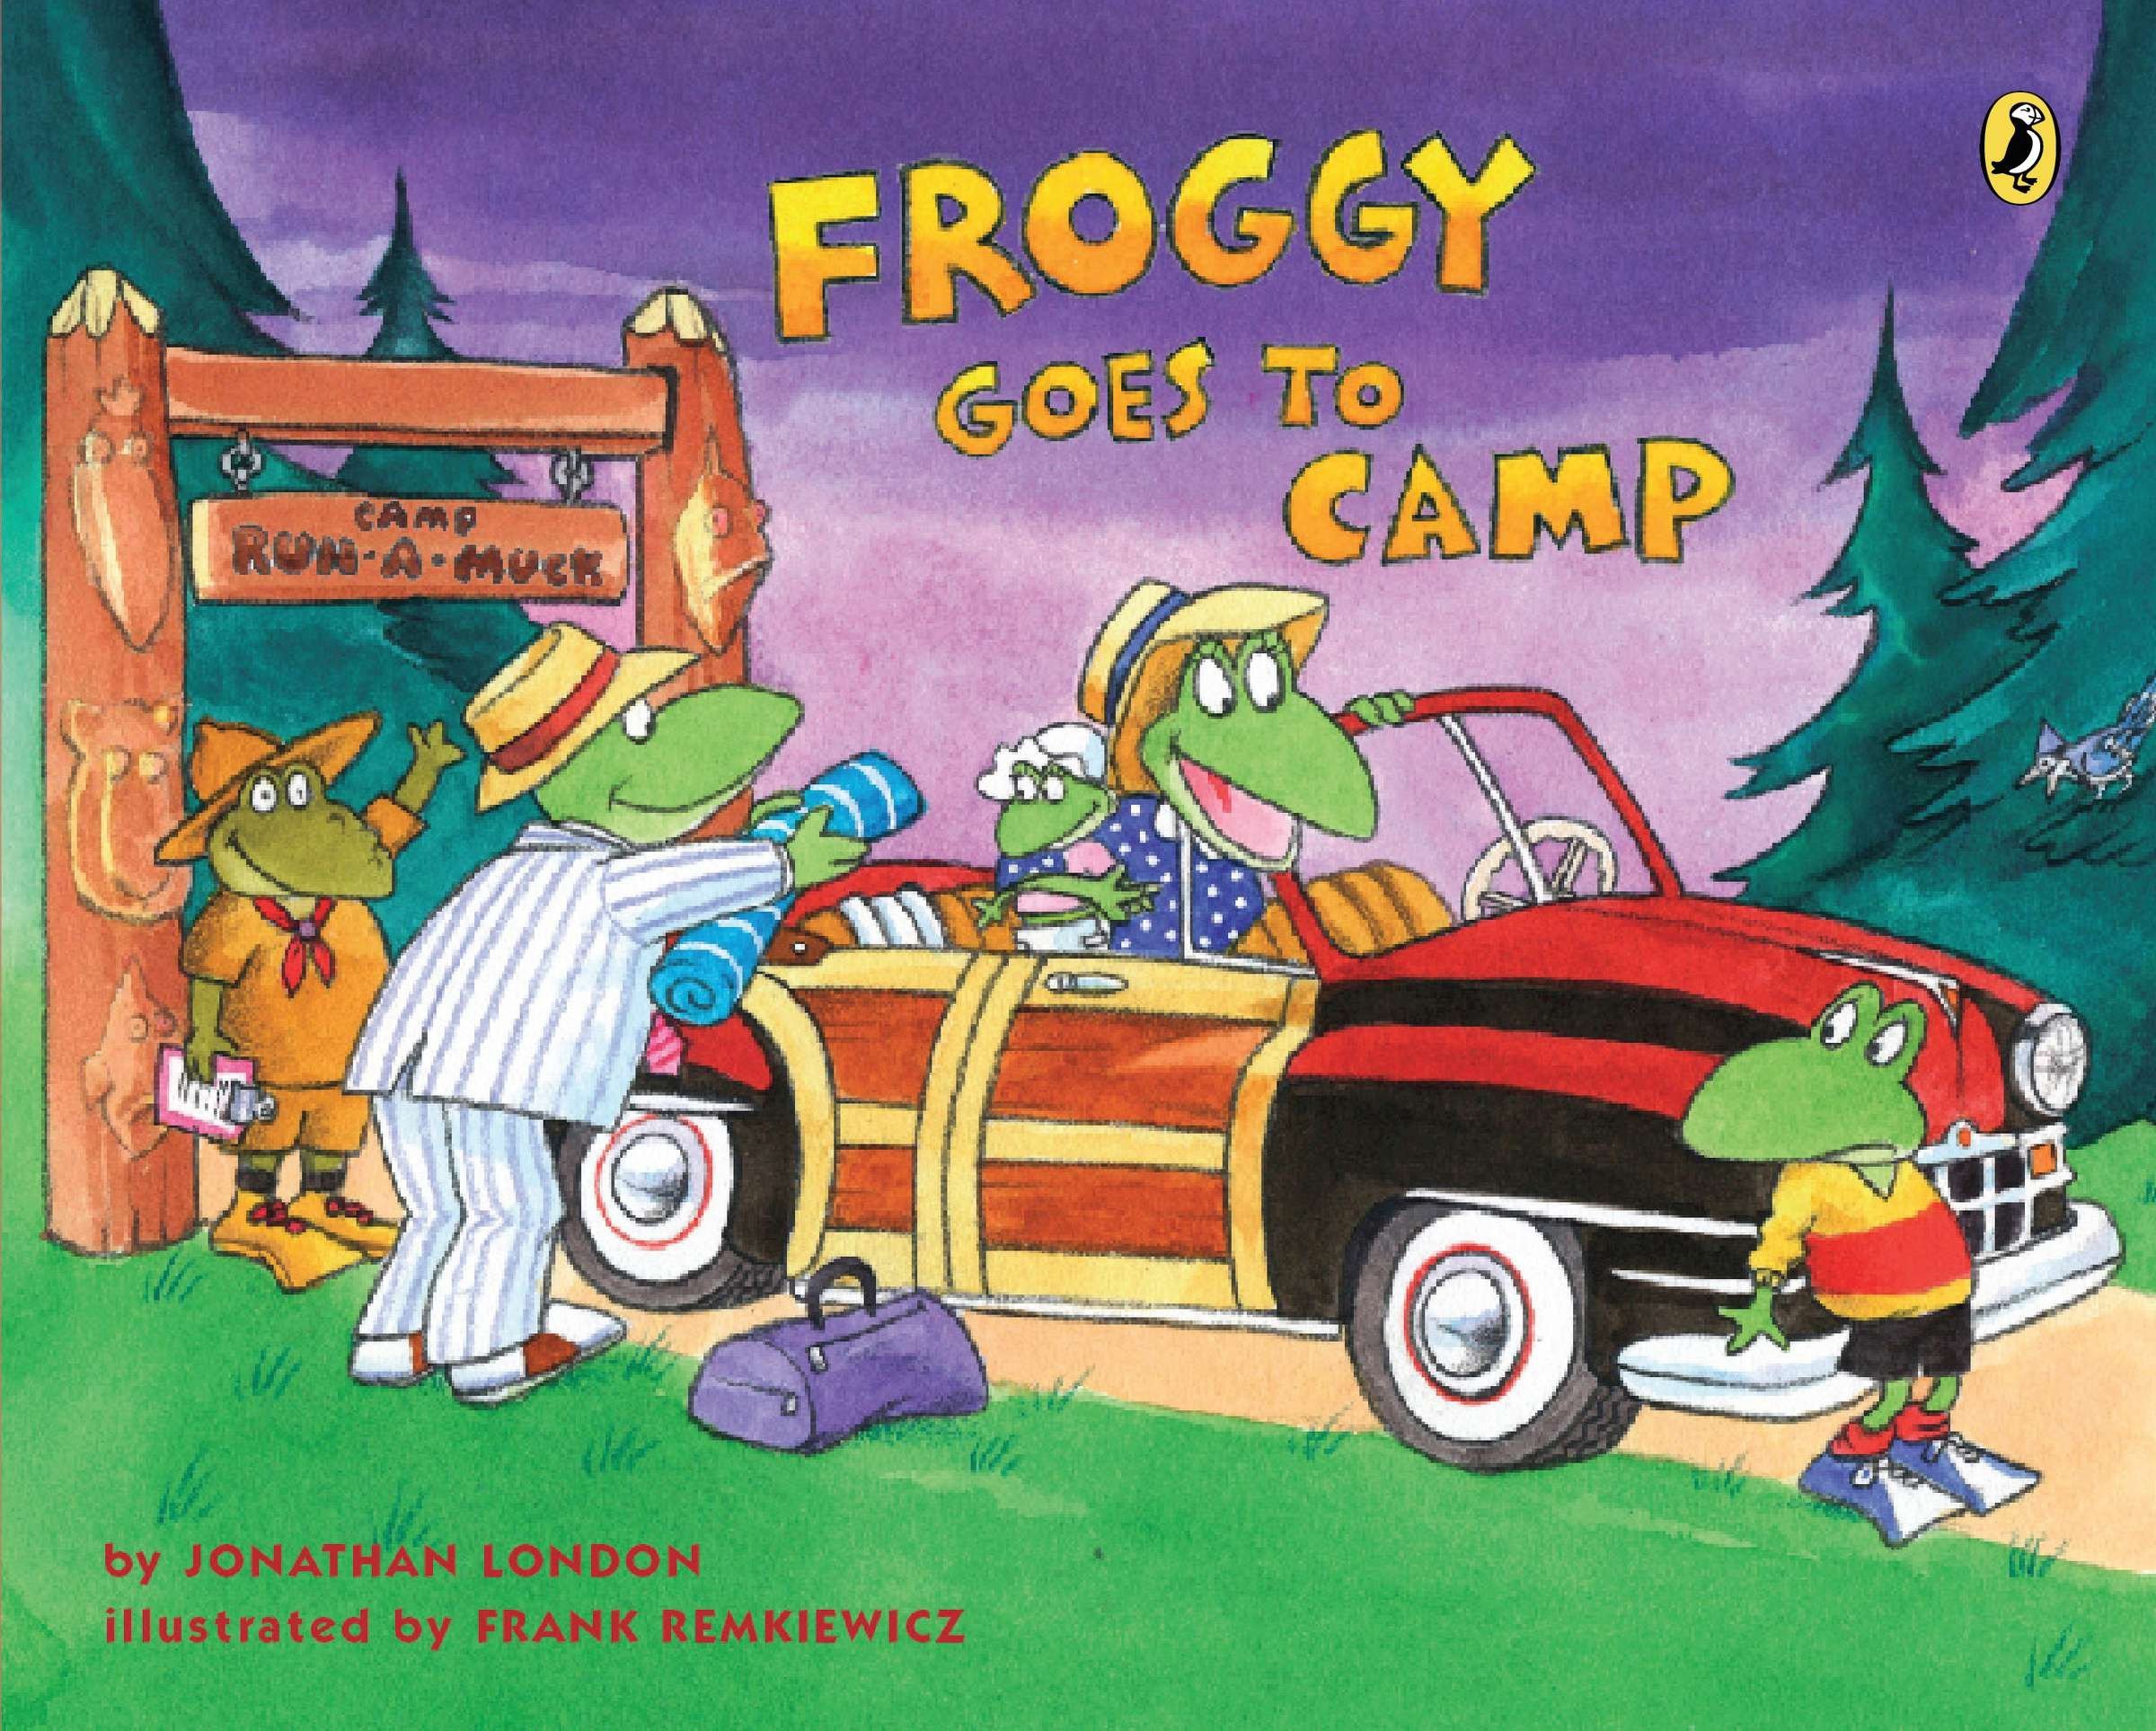 speech and language teaching concepts for Froggy Goes to Camp in speech therapy​ ​